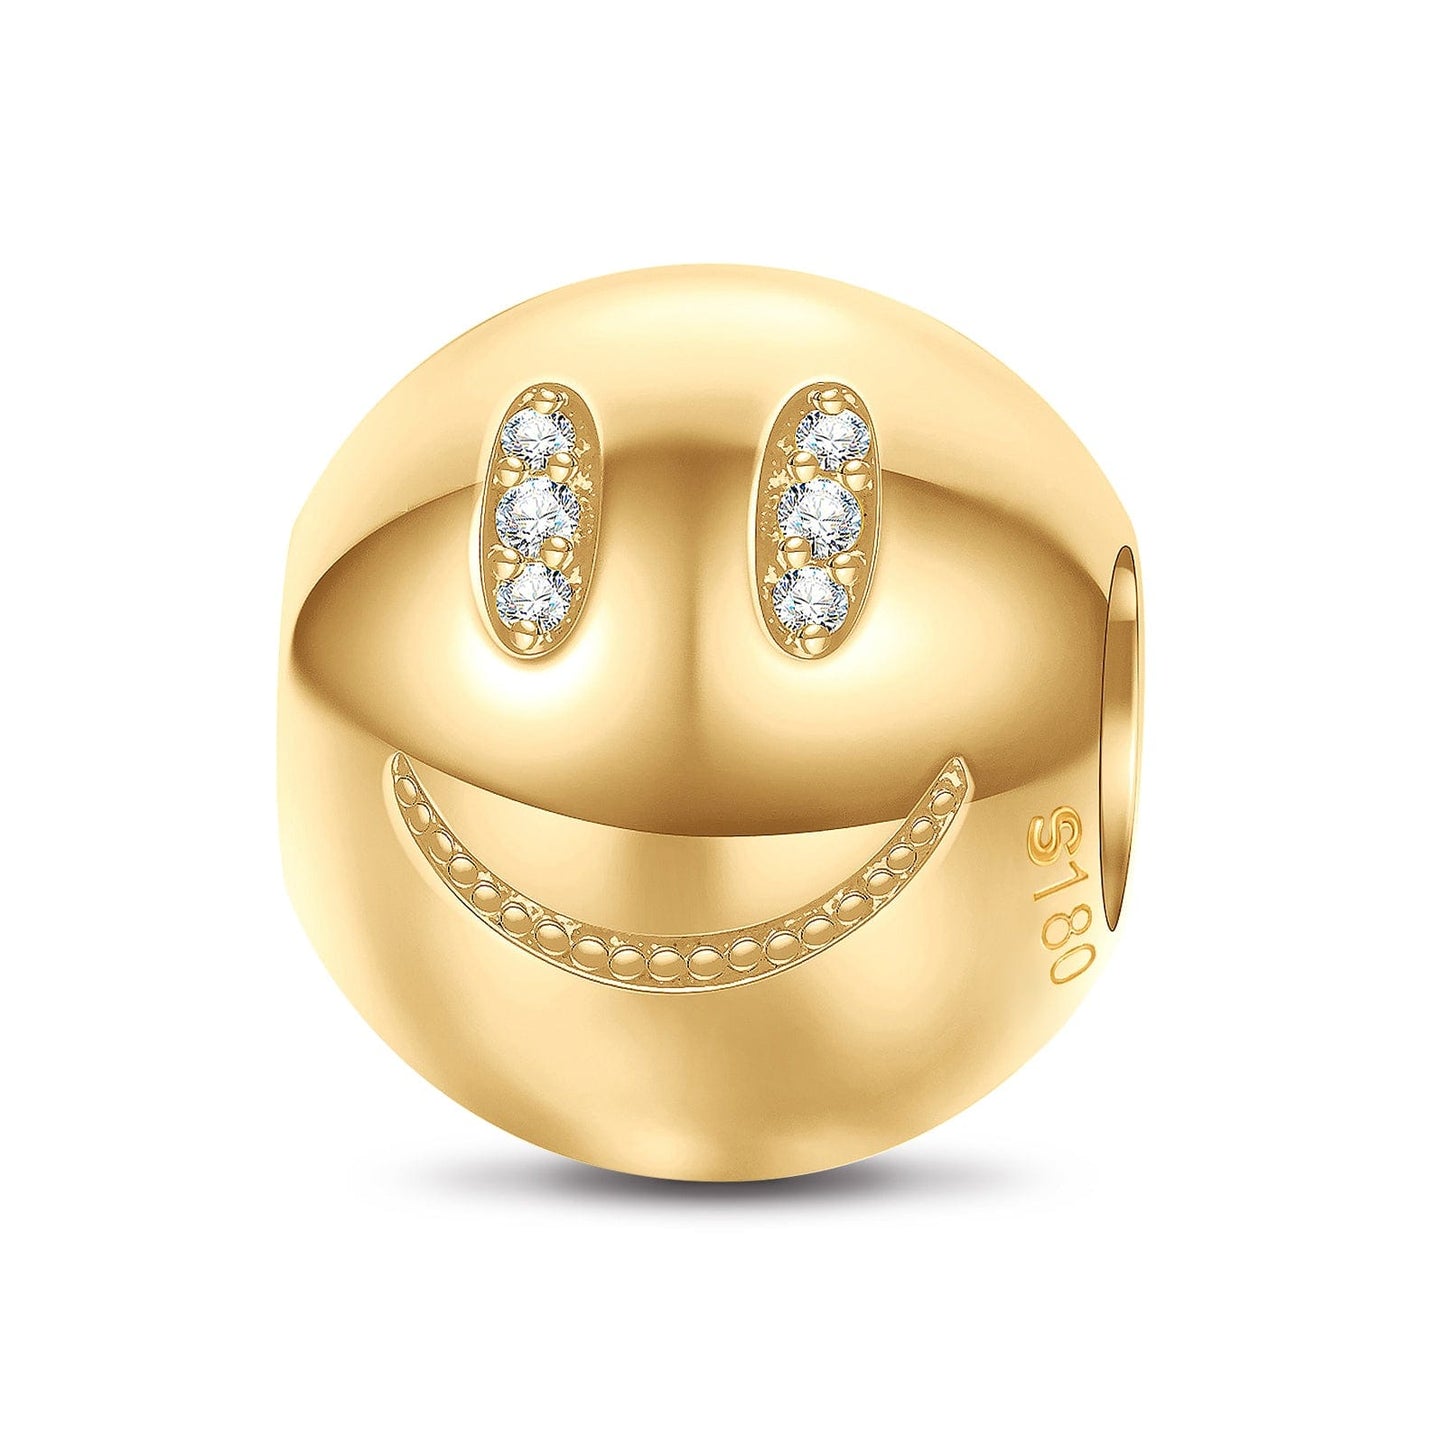 Slightly Smiling Emoji Tarnish-resistant Silver Charms In 14K Gold Plated